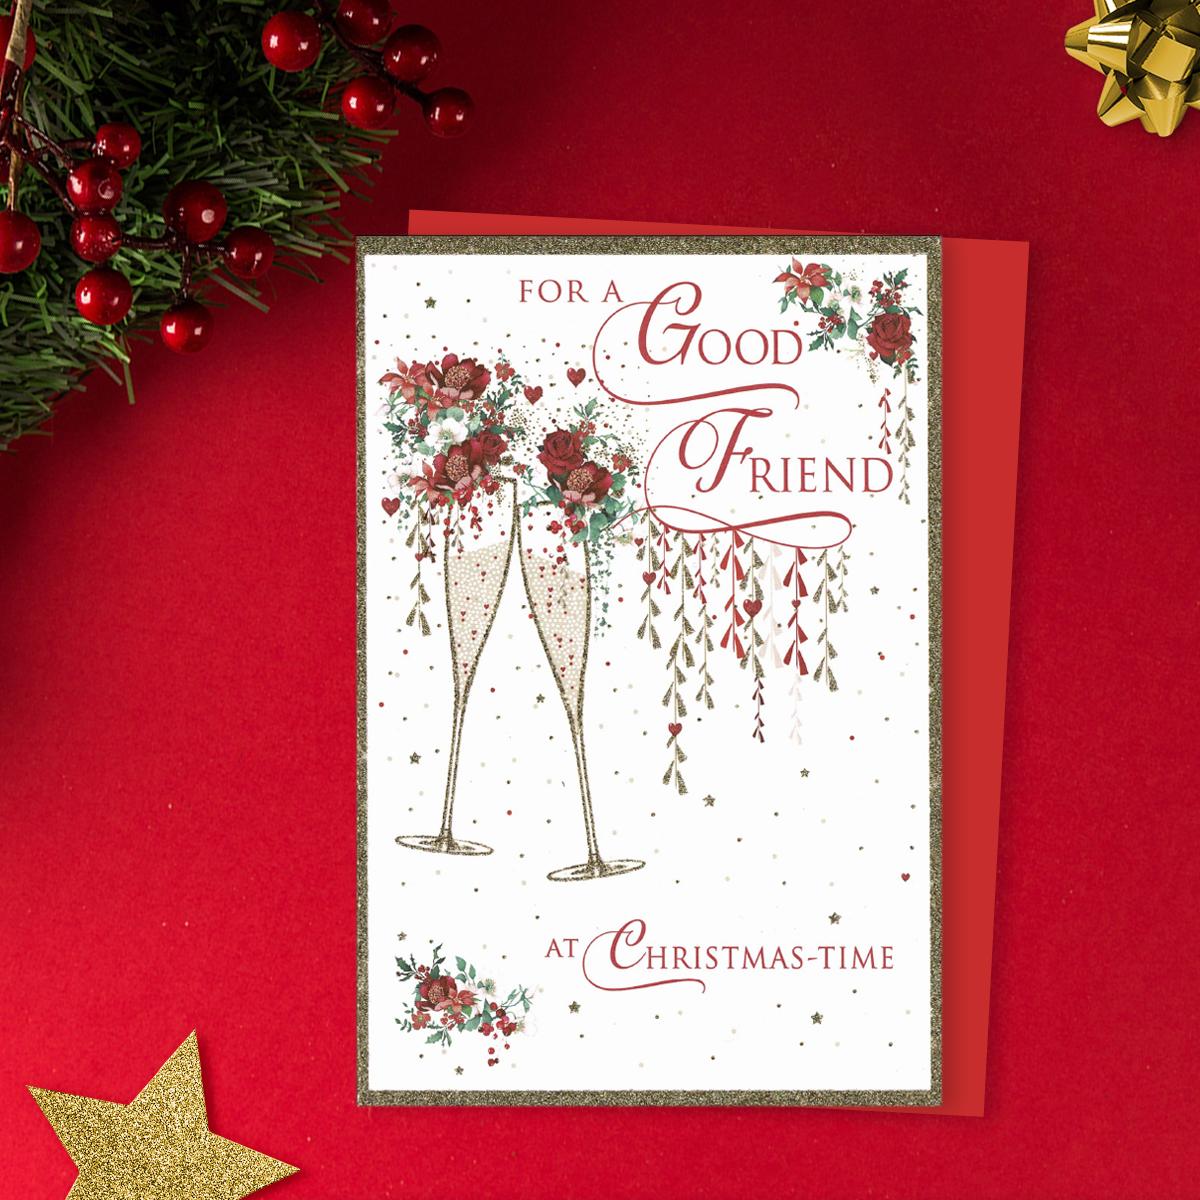 For A Good Friend At Christmas-Time Featuring Two Champagne Flutes Filled With Red Roses. Finished With Gold Sparkle And Red Envelope